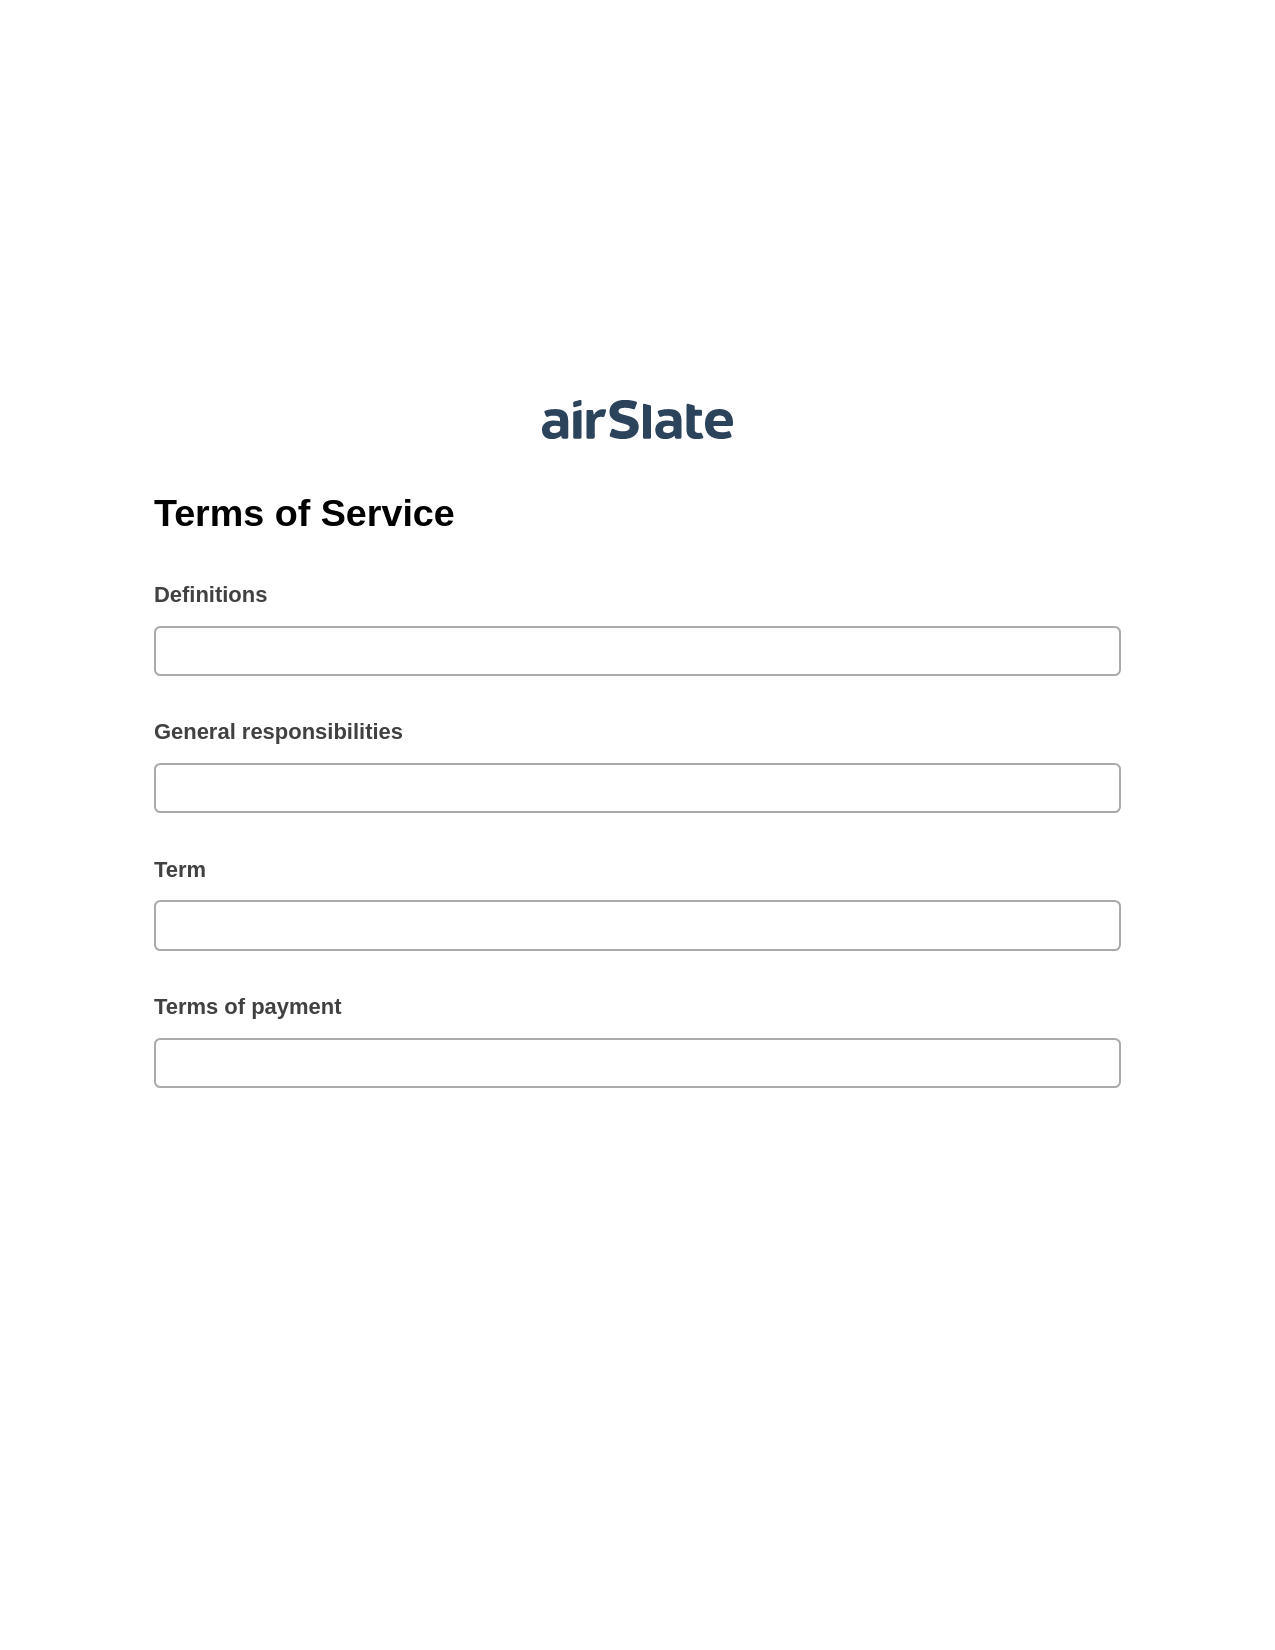 Terms of Service Pre-fill from Salesforce Records with SOQL Bot, System Bot - Create a Slate in another Flow, Export to Excel 365 Bot